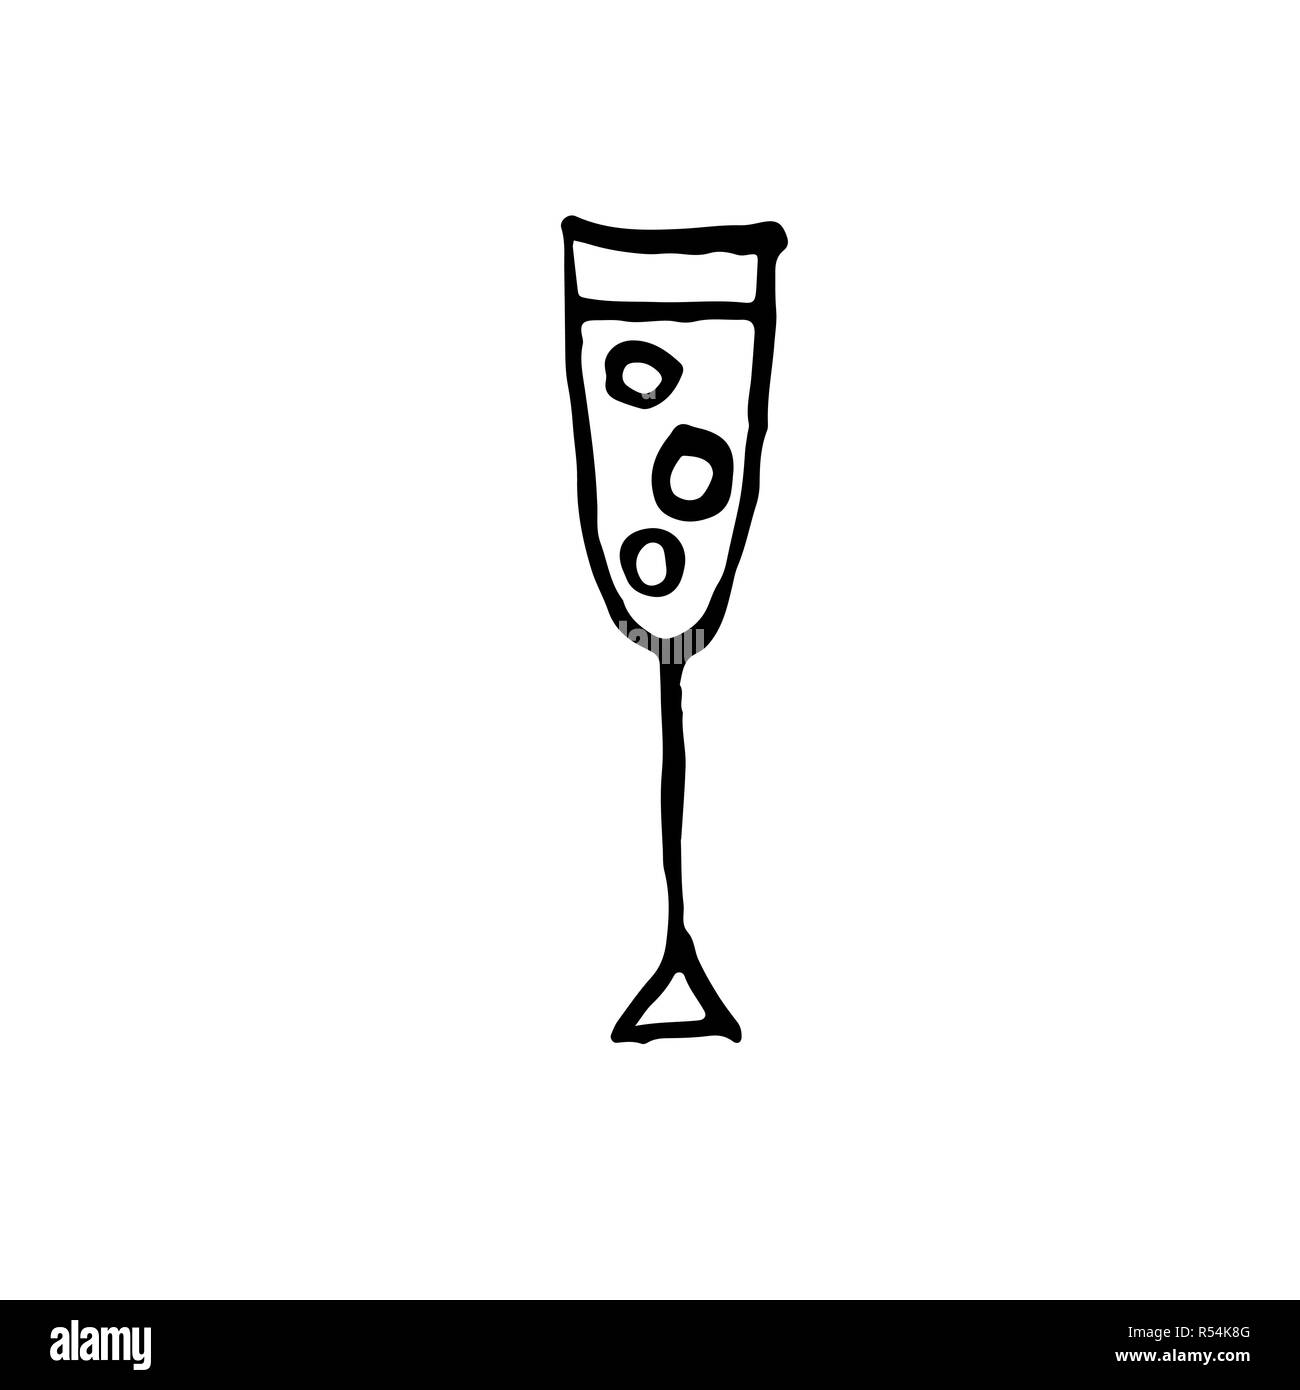 Glass of champagne icon. Vector grunge brush illustration. Stock Vector